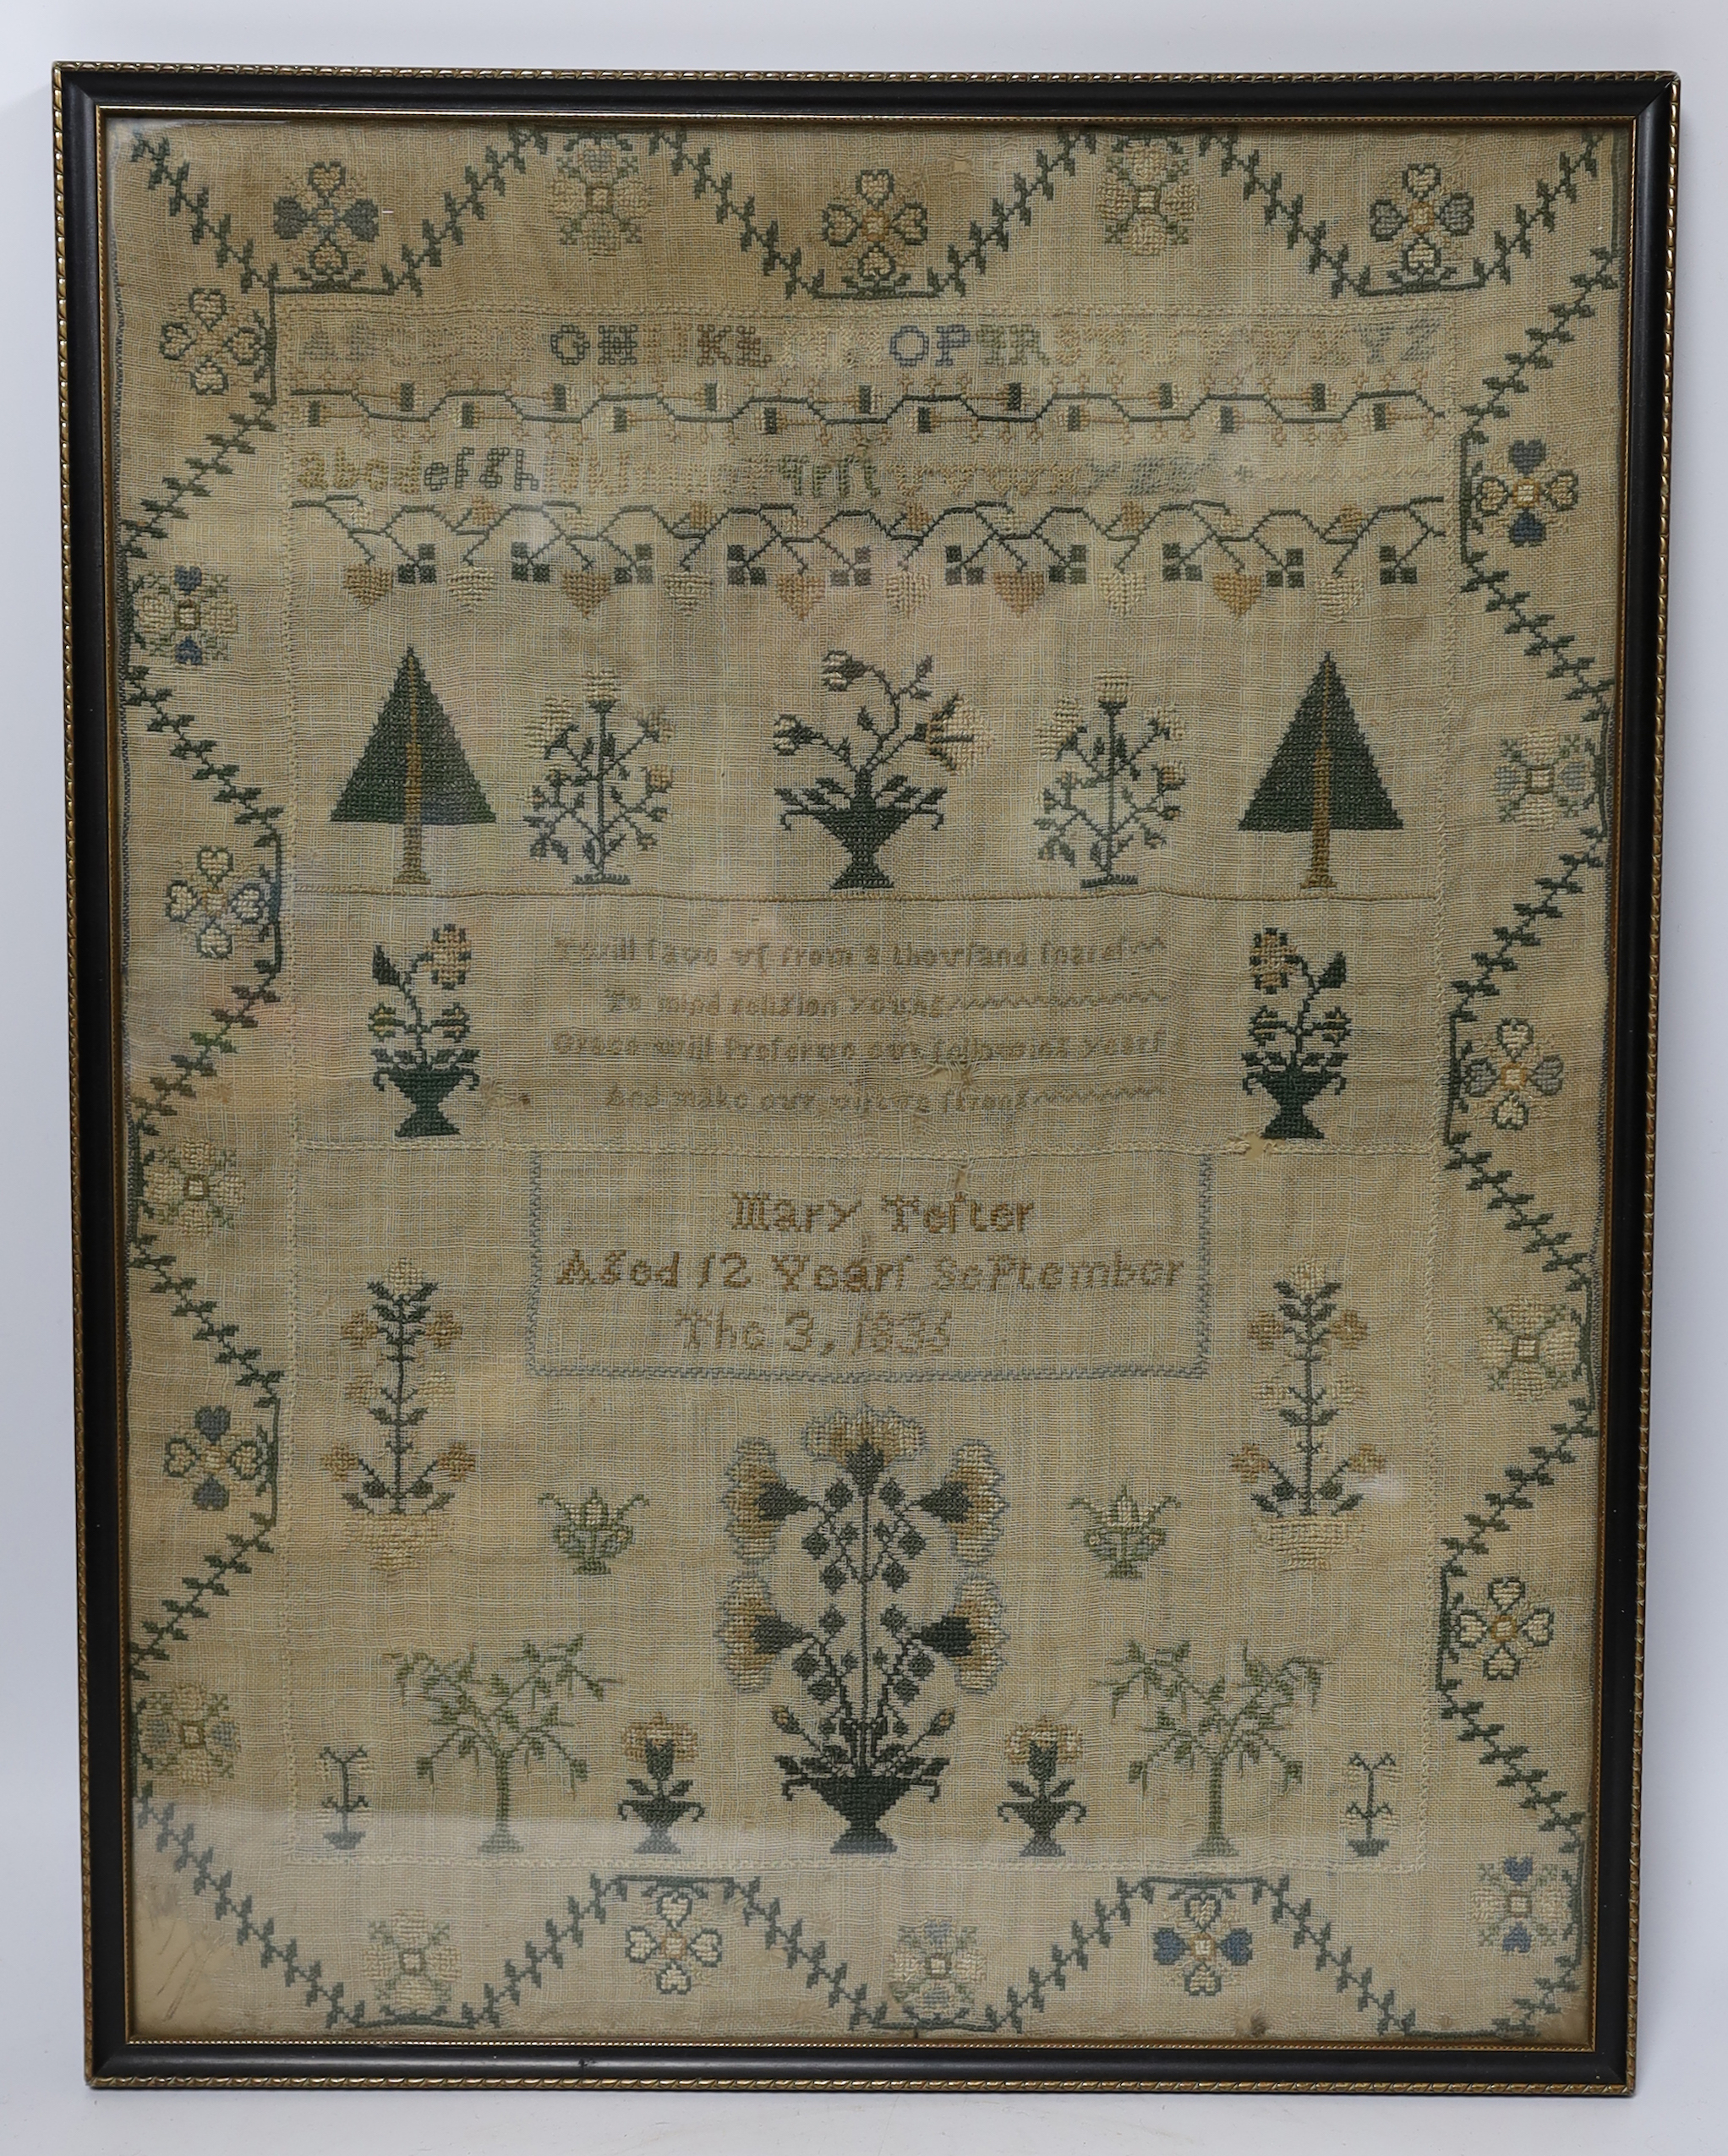 A framed William IV sampler, by Mary Telter, aged 12 years September the 3, 1833, with alphabet, religious verse, tree and floral spot embroidery all within an embroidered border, sampler 32cm wide x 41.5cm high         